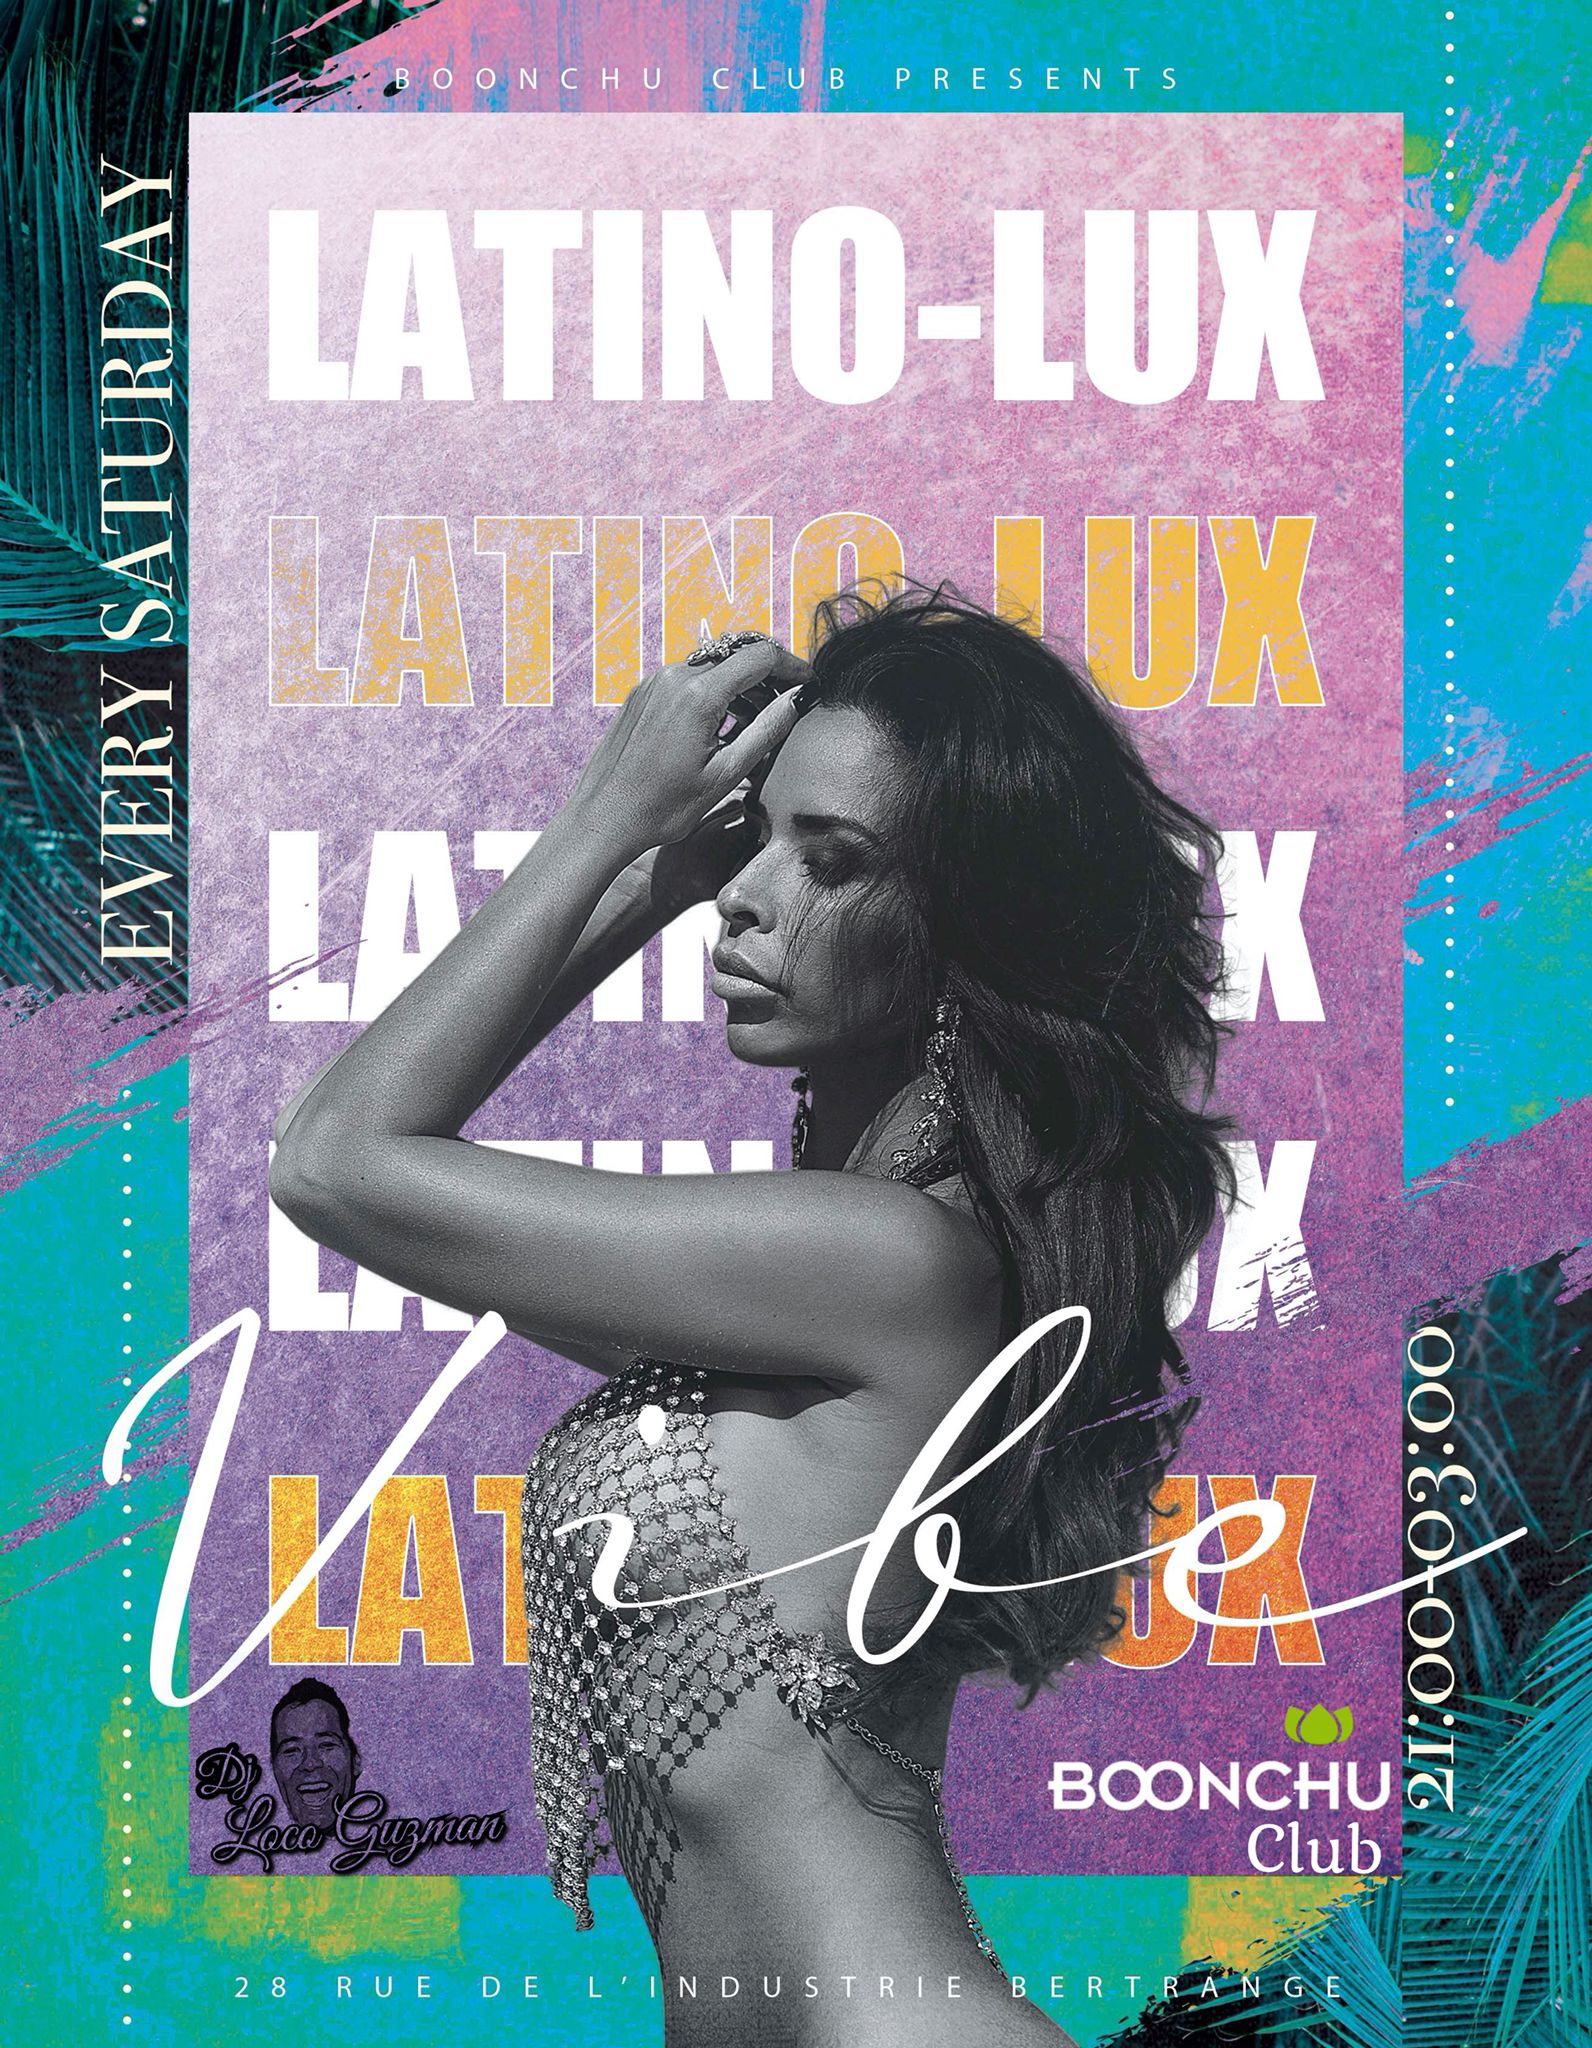 Latino lux party